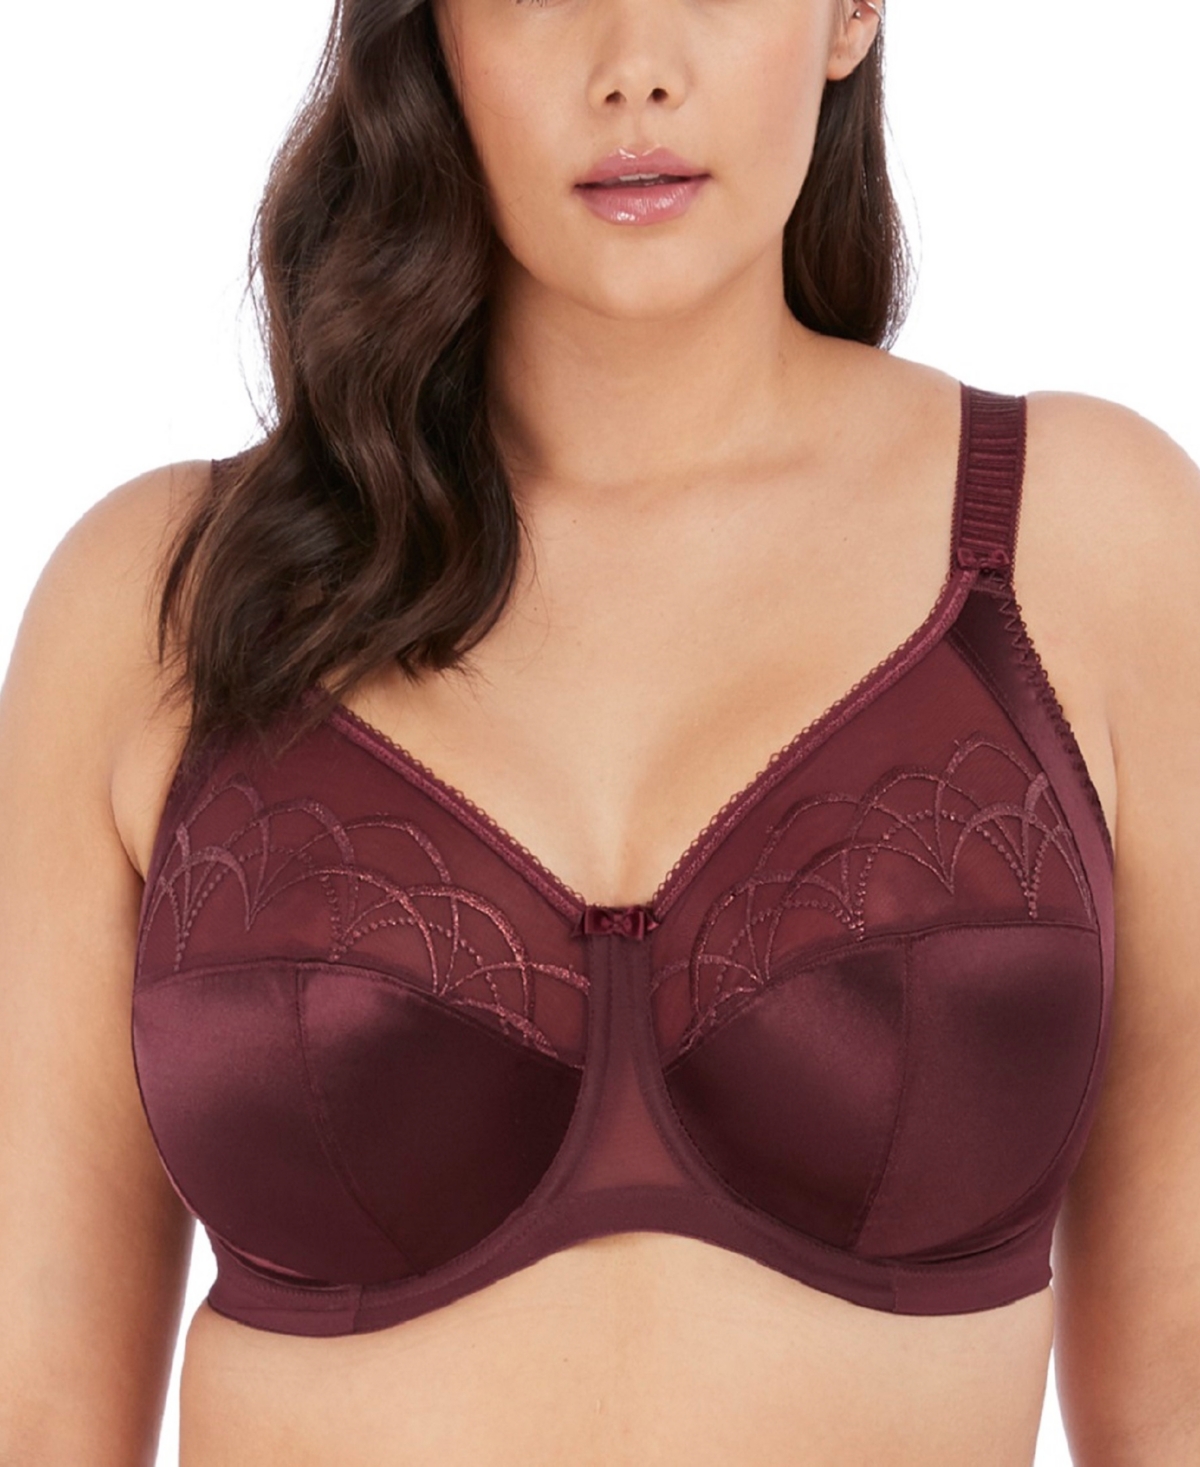 Elomi Cate Full Figure Underwire Lace Cup Bra EL4030, Online Only